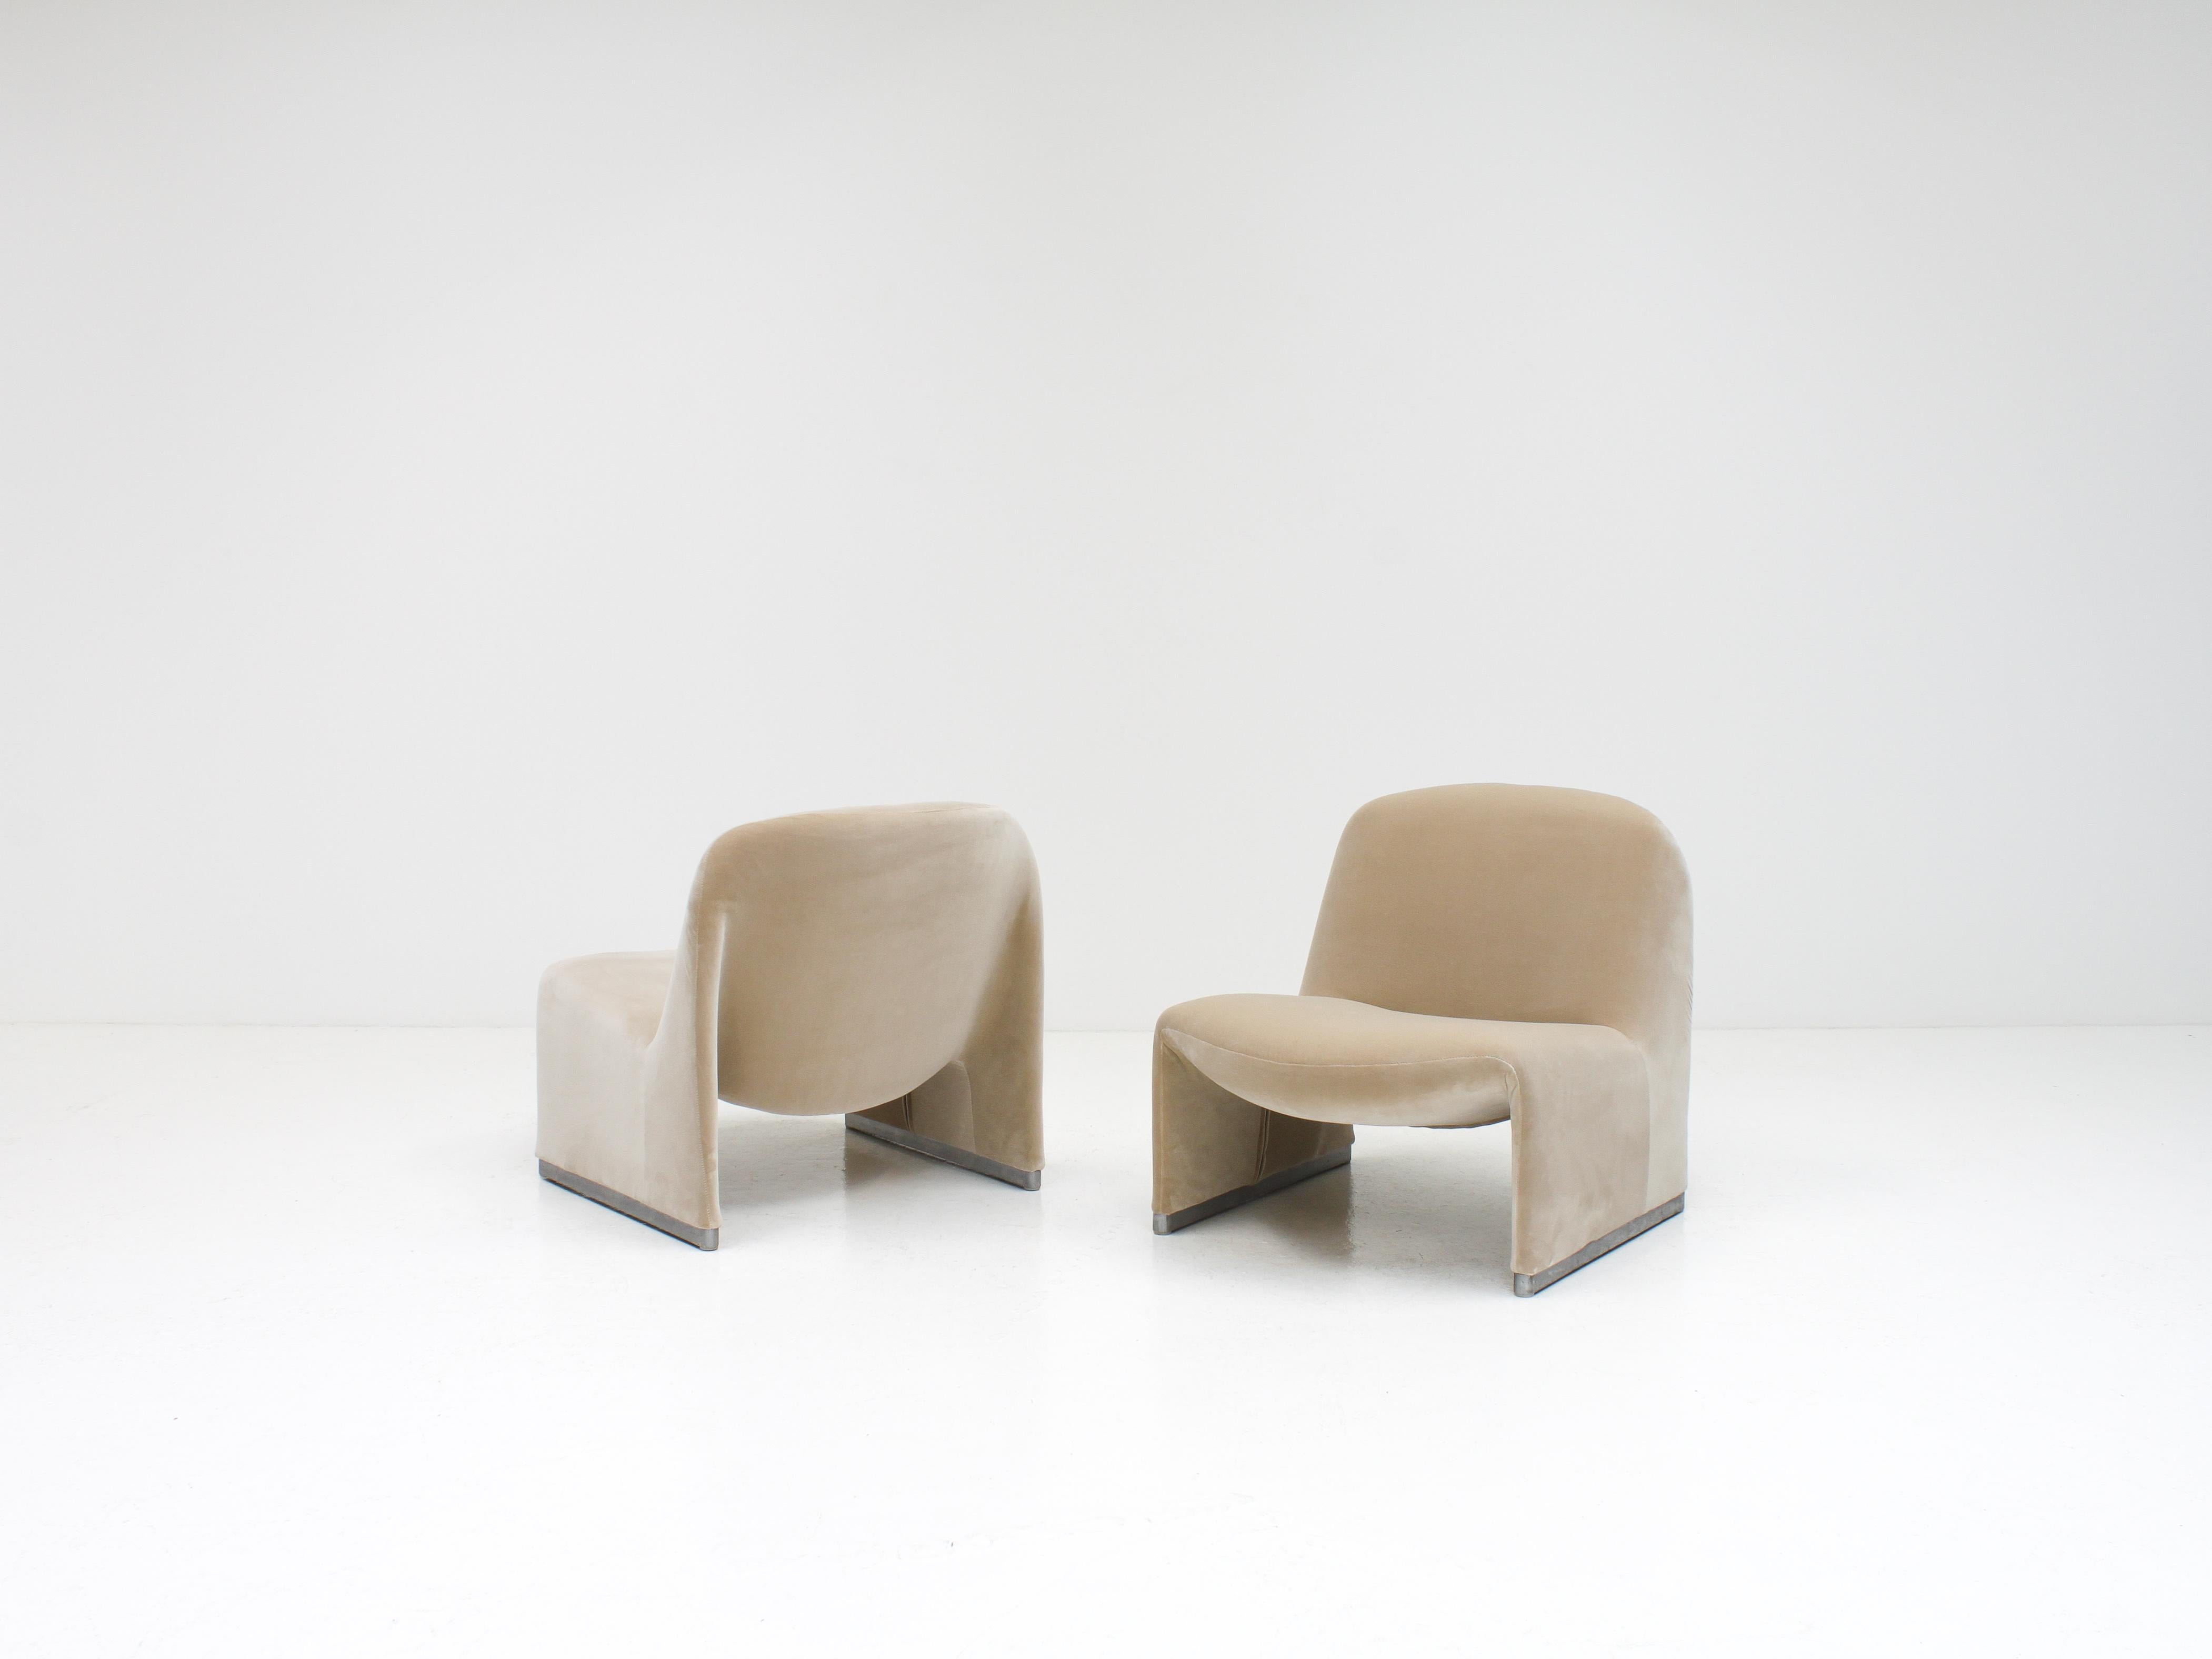 20th Century Giancarlo Piretti “Alky” Chairs in New Velvet, Artifort, 1970s - *Customizable* For Sale